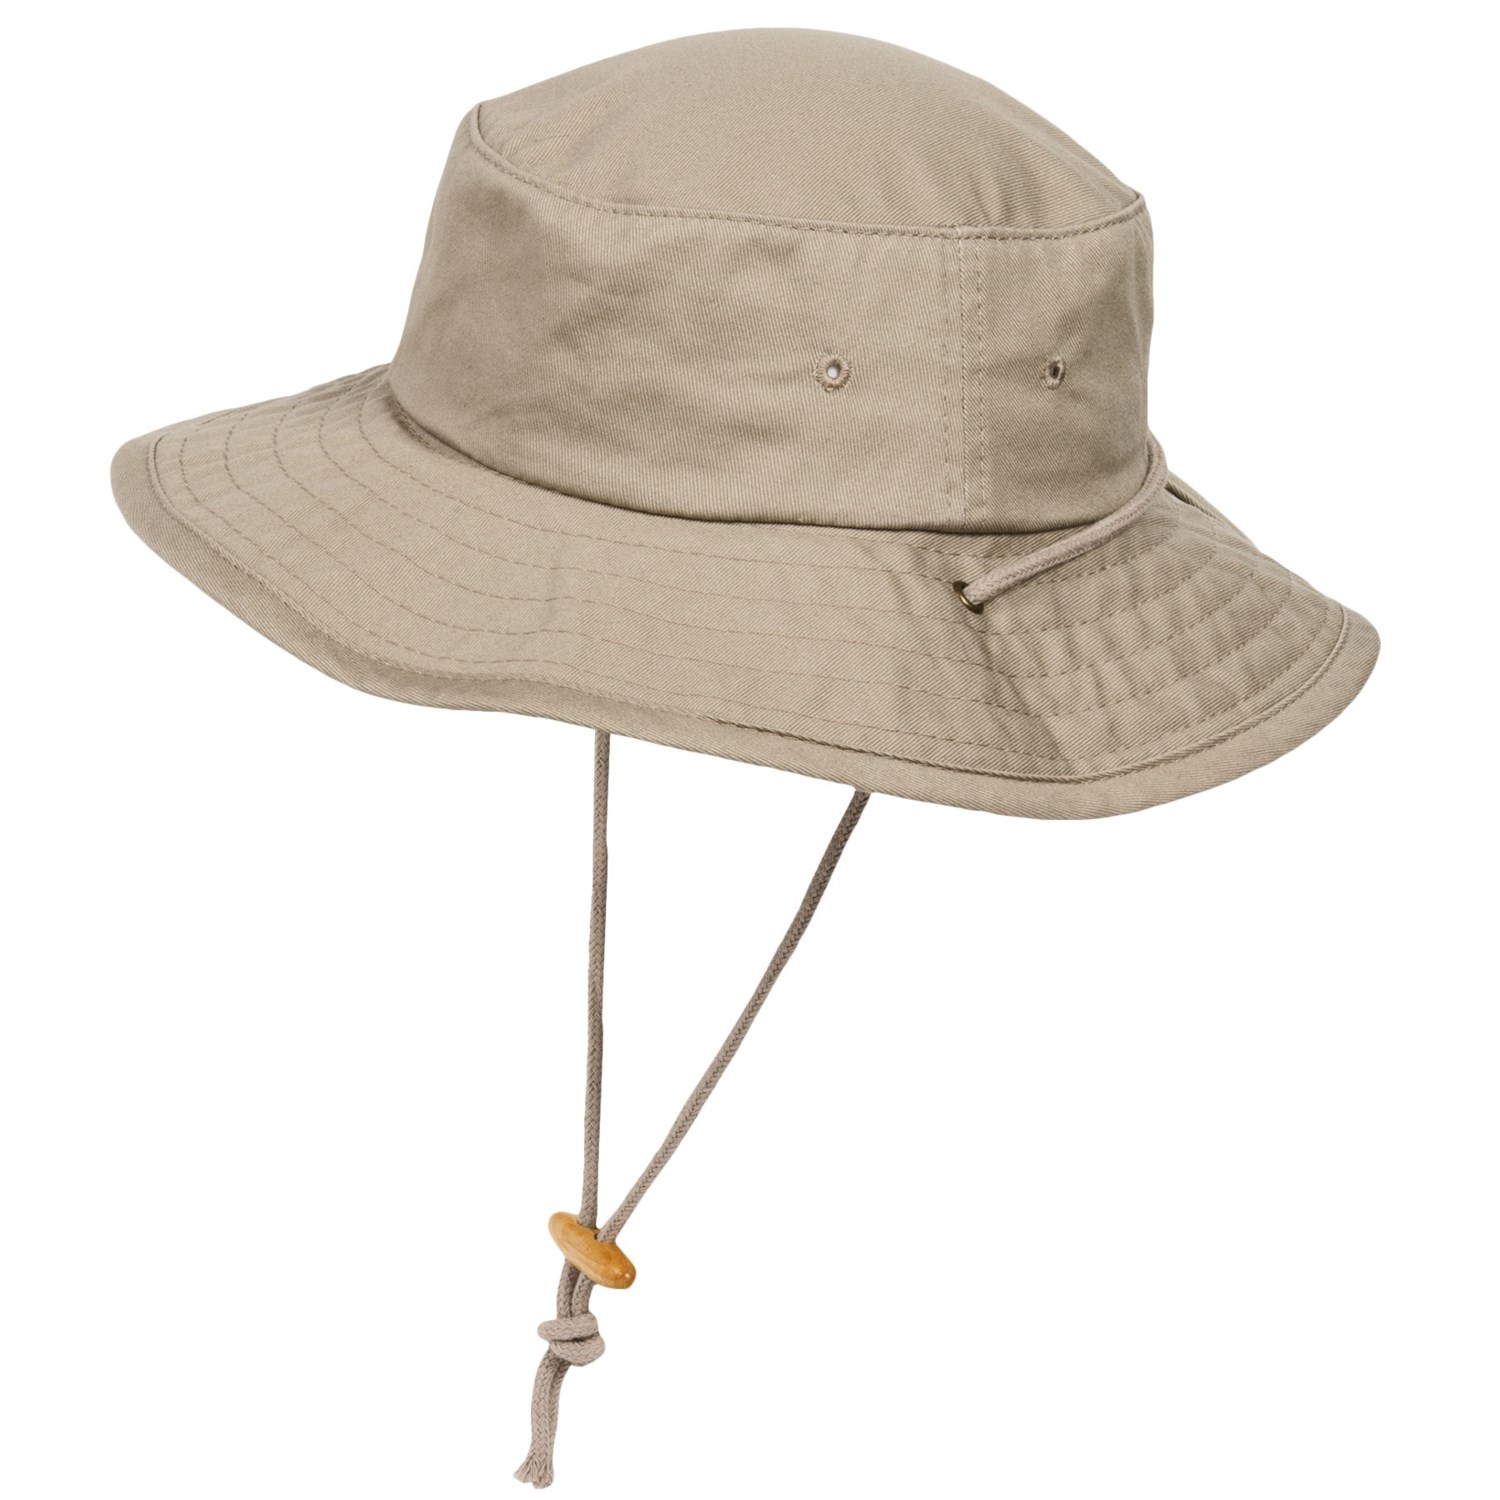 Dorfman Pacific Twill Boonie Hat with Chin Cord (For Men) - Save 66%